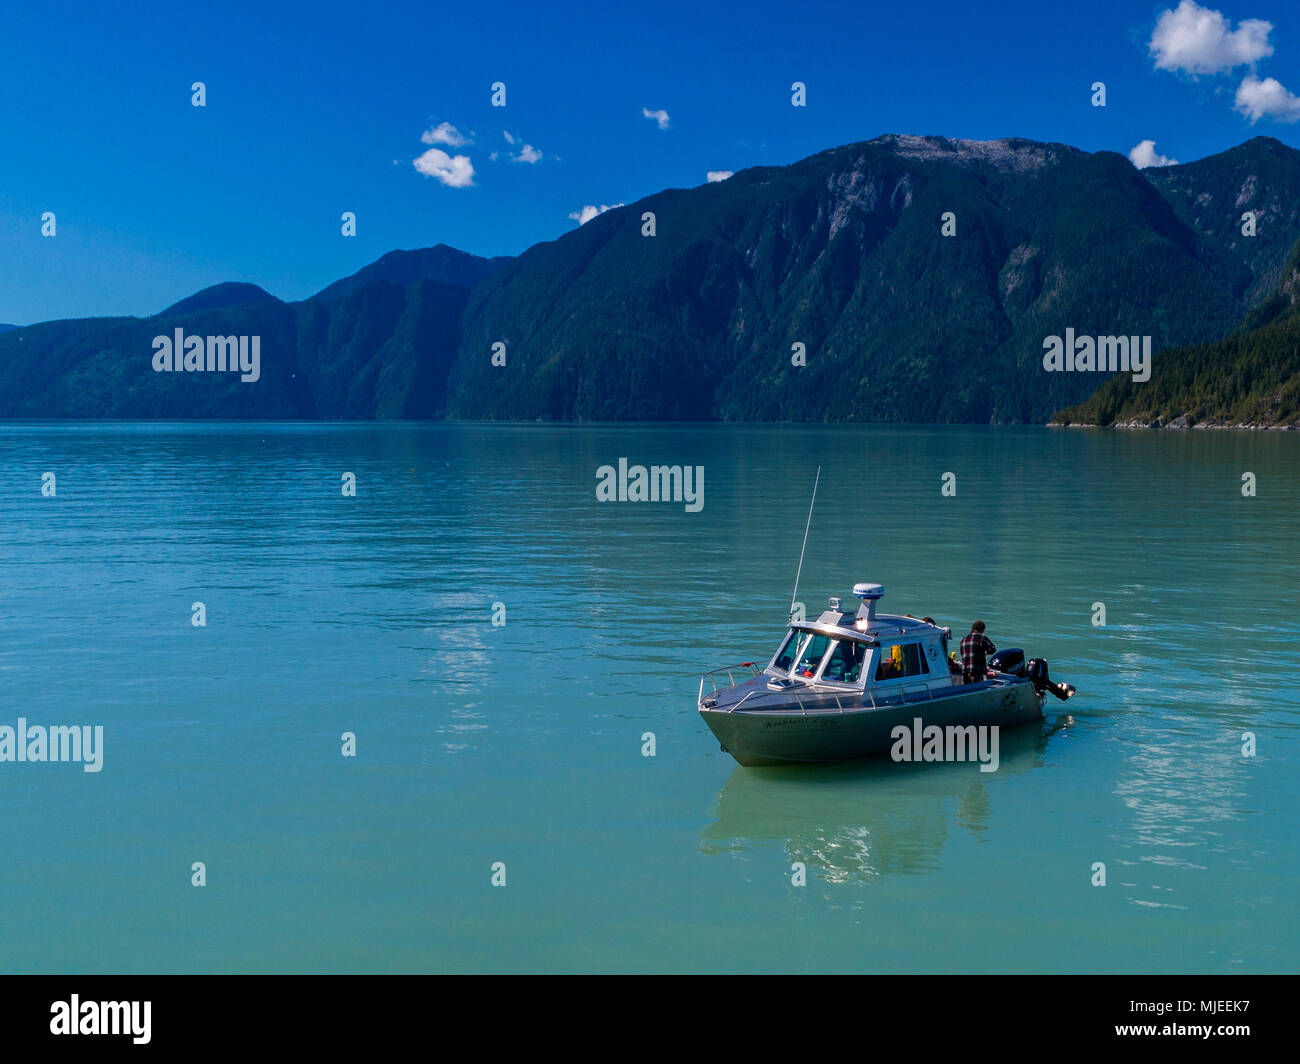 The 'Ambient Light' tour boat of Vancouver Island Photo Tours in Knight Inlet, British Columbia, Canada. Stock Photo